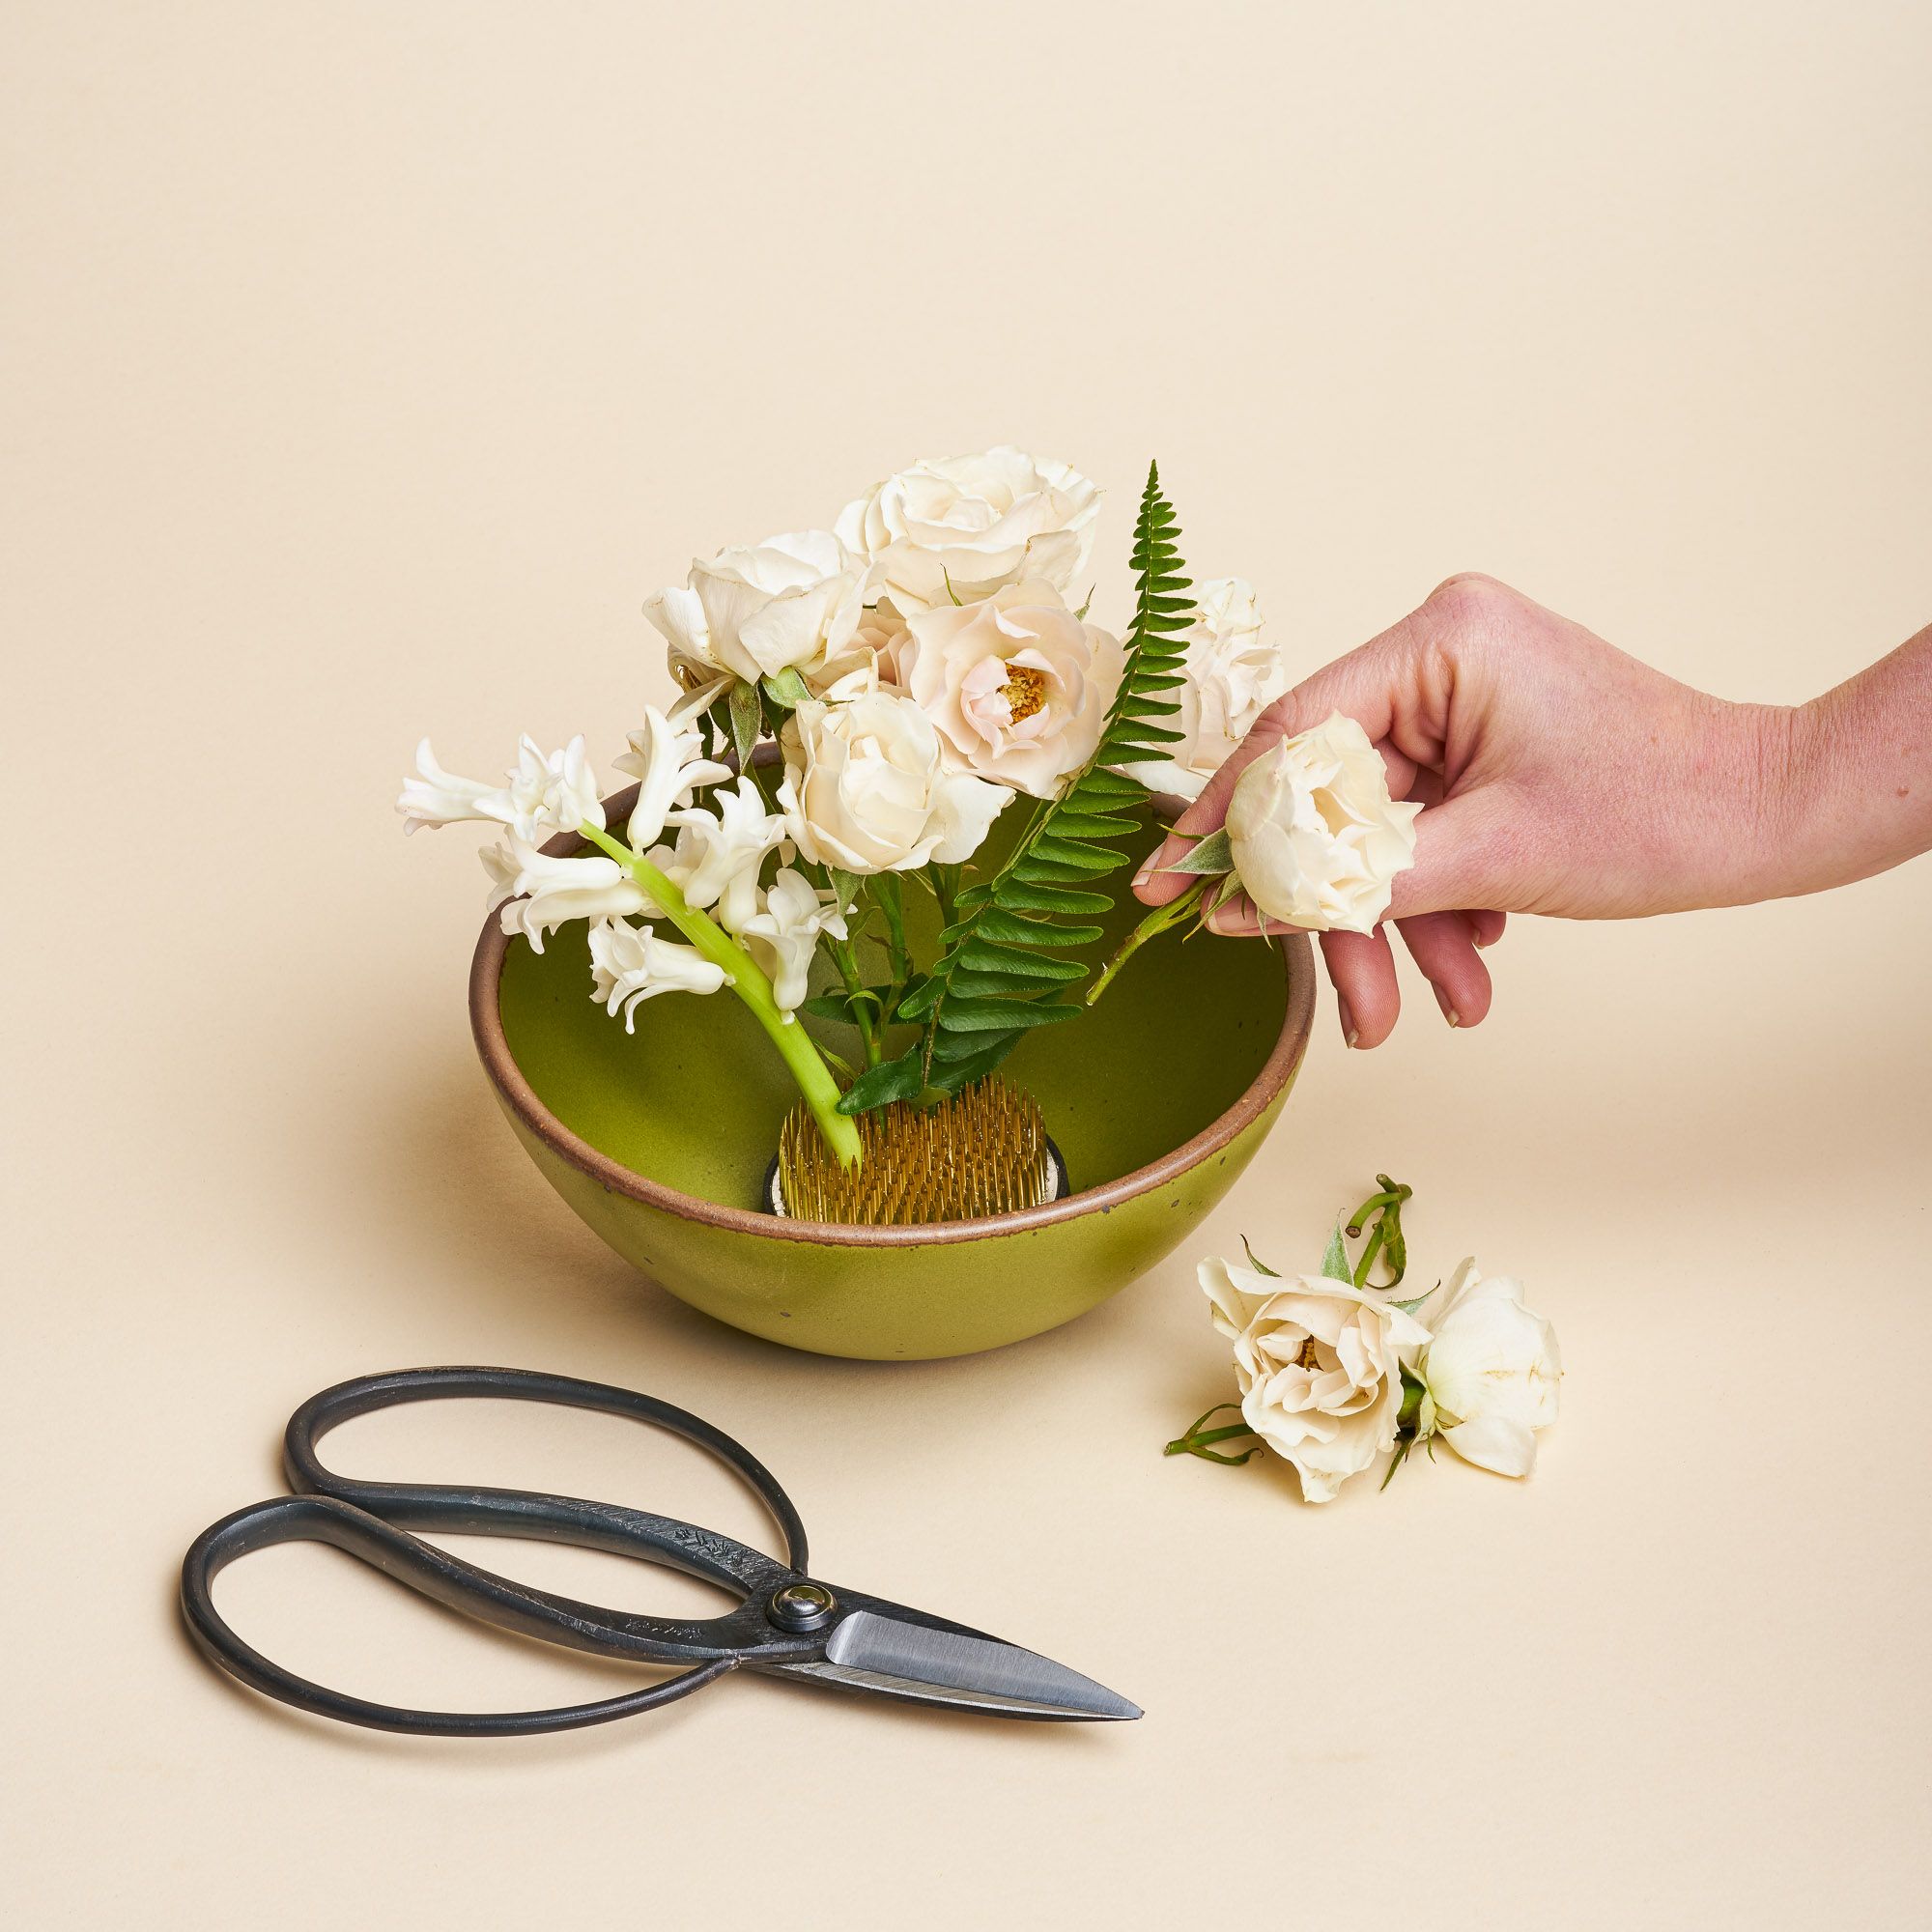 A set that comes with gardening shears, a green East Fork bowl and a "Flower Flog," a small circular dish with spikes used to construct floral arrangements and keep flowers in place. Flower frogs sit inside the floral container in the water and are traditionally known for their use in ikebana, the Japanese art of floral design.